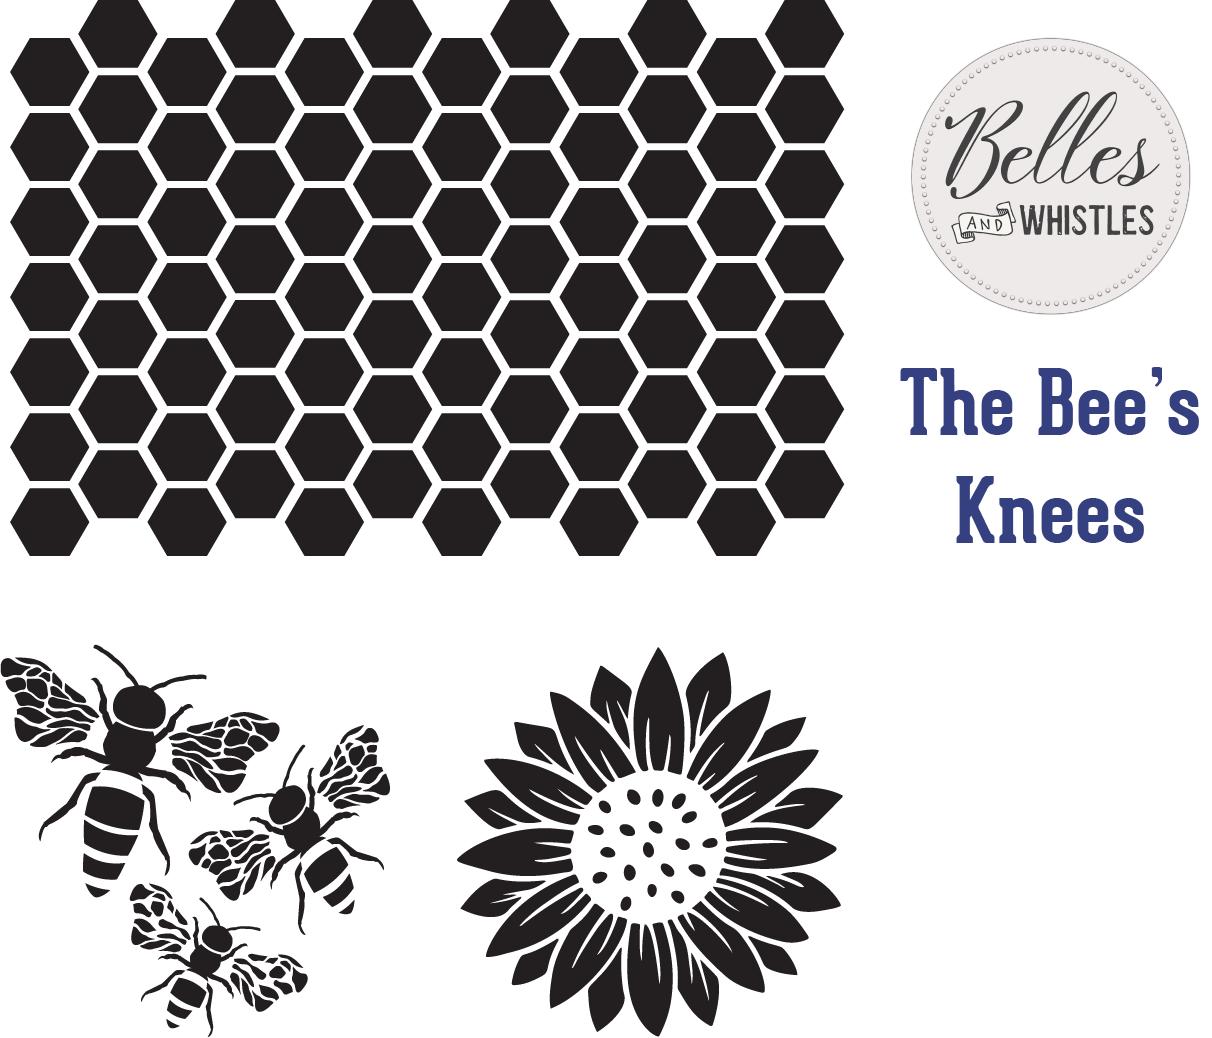 Belles & Whistles -  The Bees Knees Stencil - 14x18in (35.56 x 45.72cm)